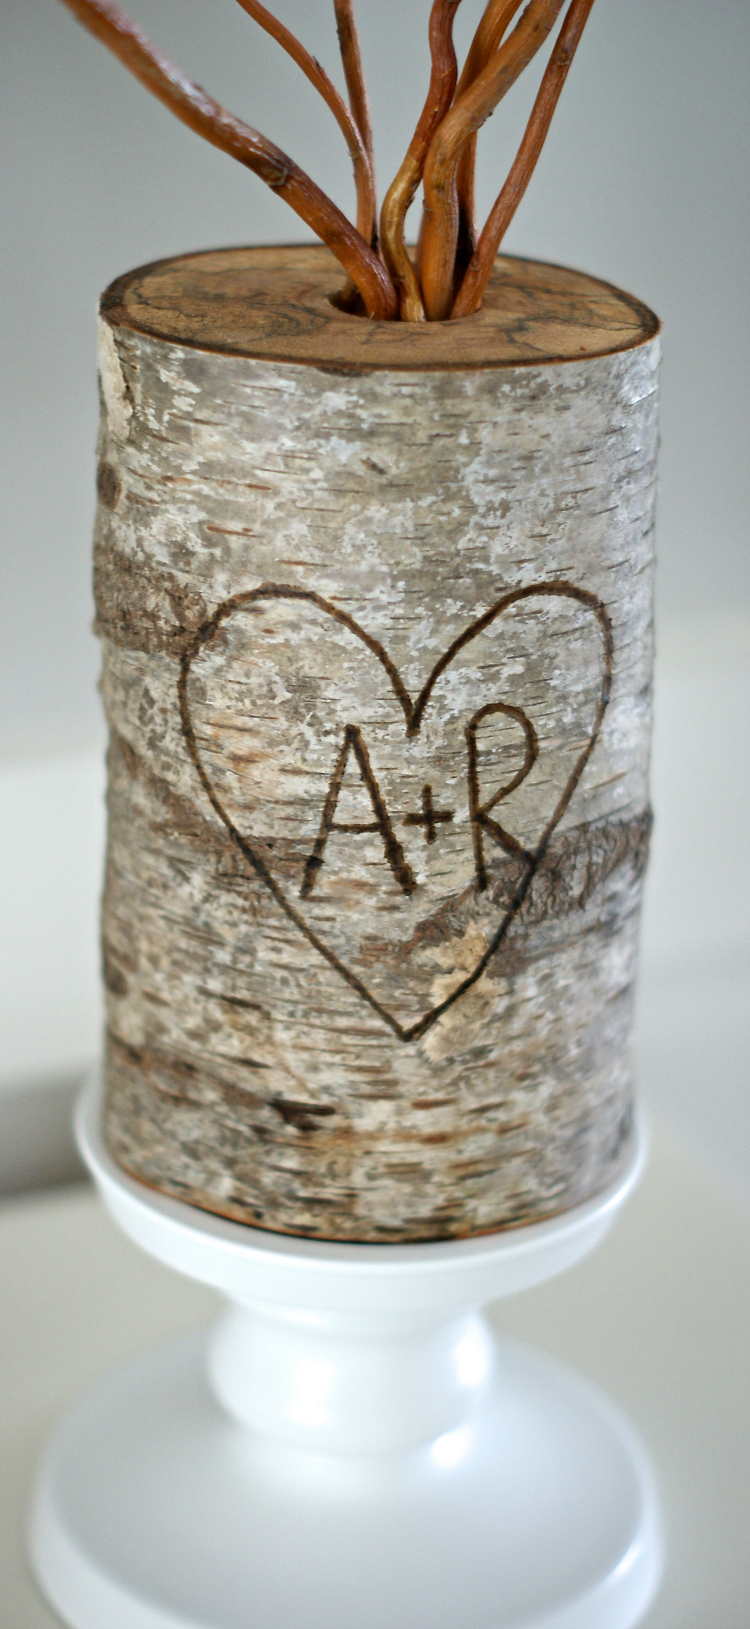 Add a finish to the top of your log and branches, and arrange them in your log vase.